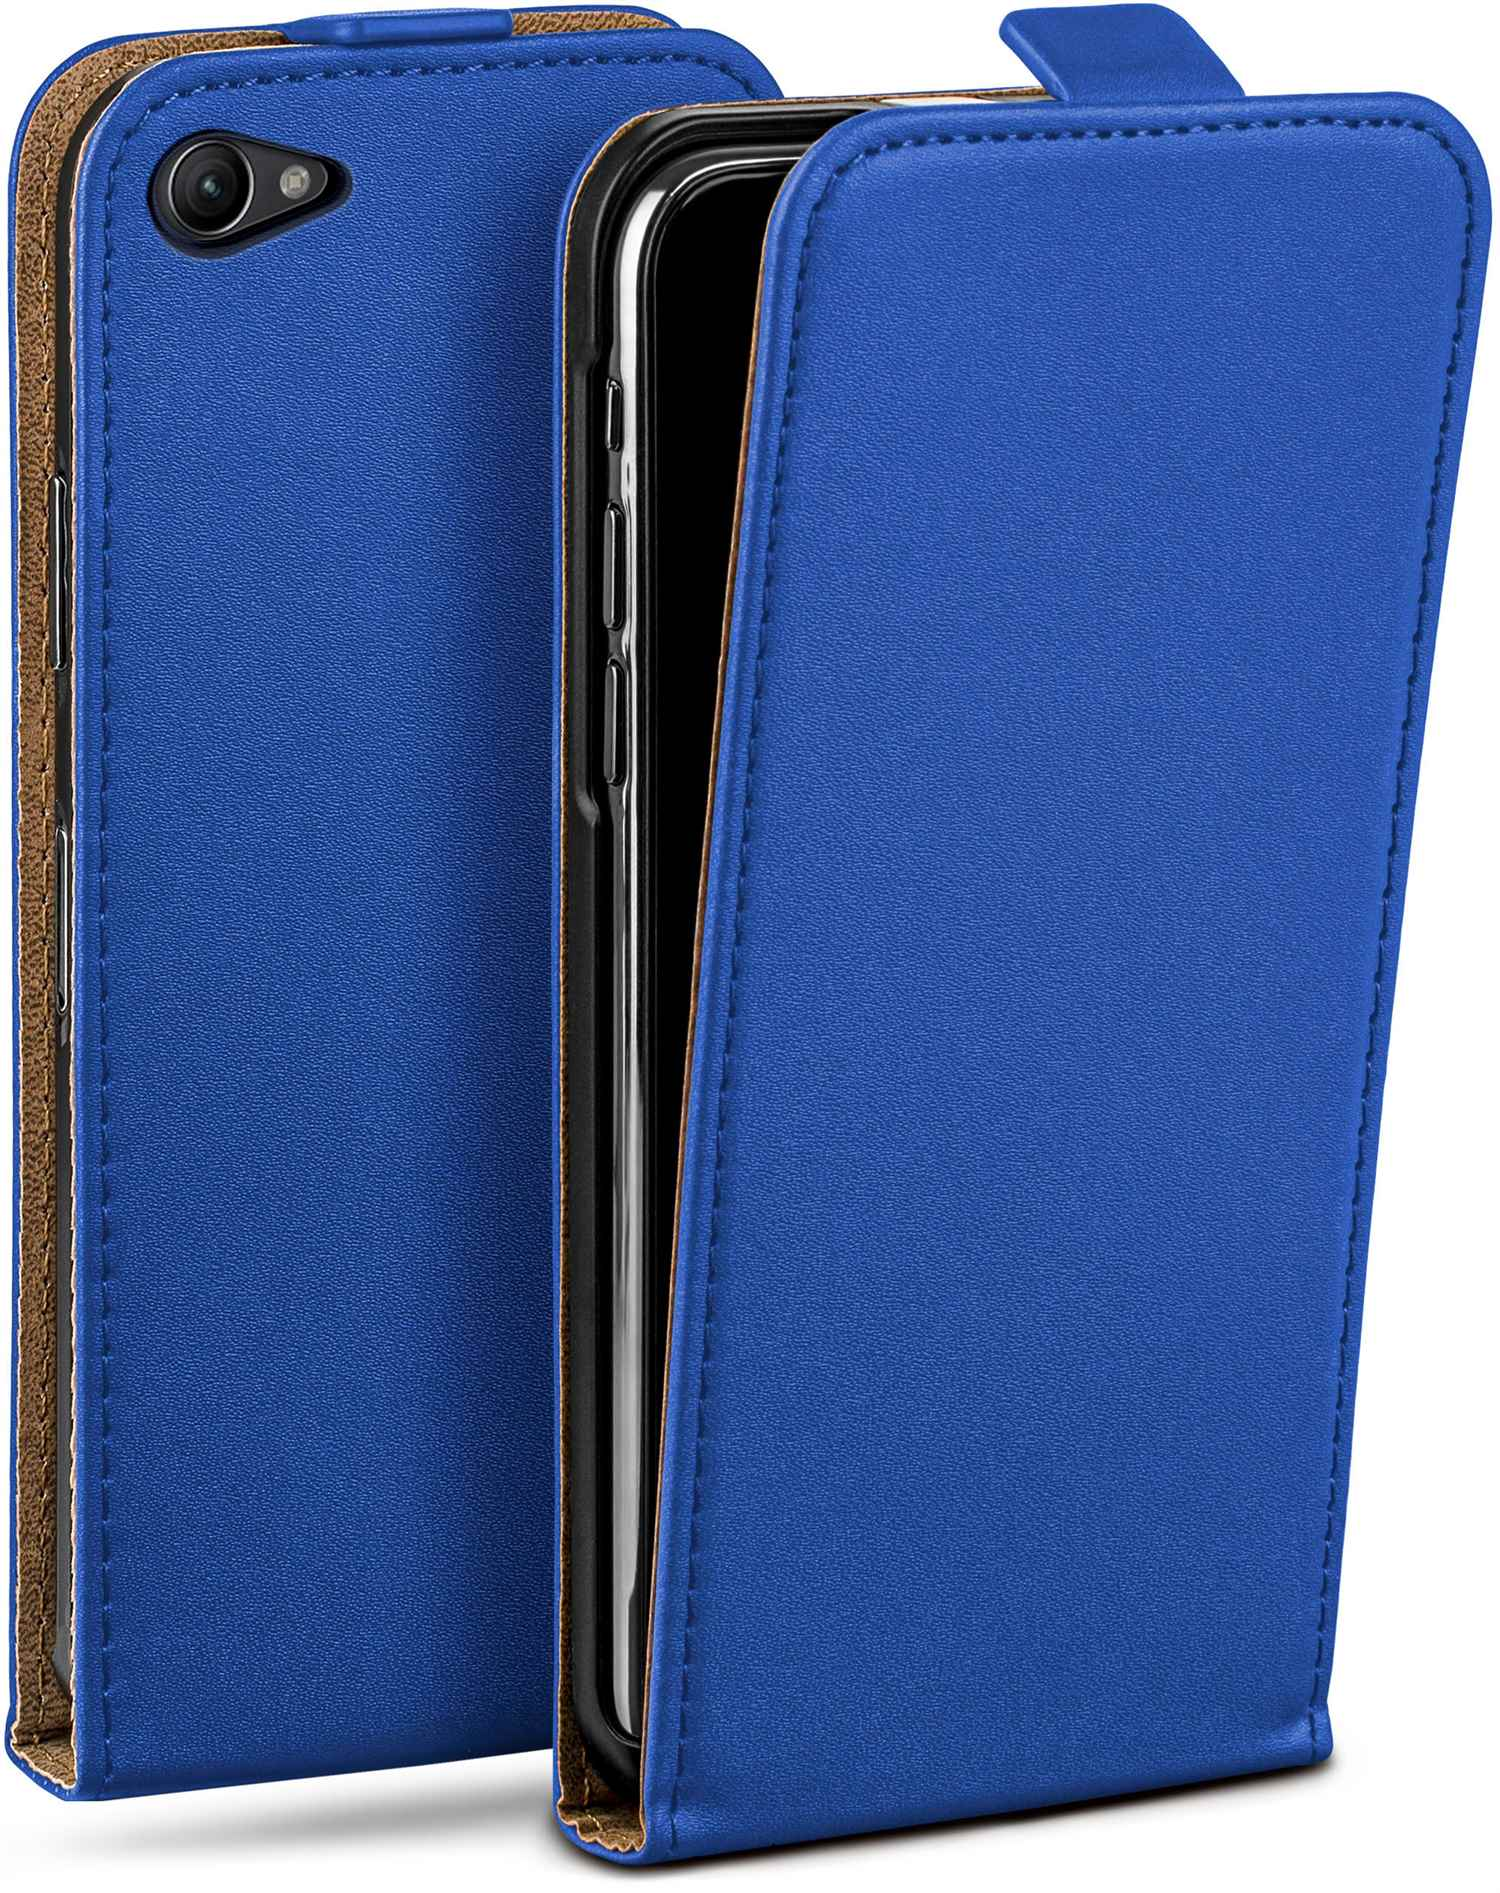 MOEX Flip Case, Flip Cover, Compact, Z1 Xperia Sony, Royal-Blue